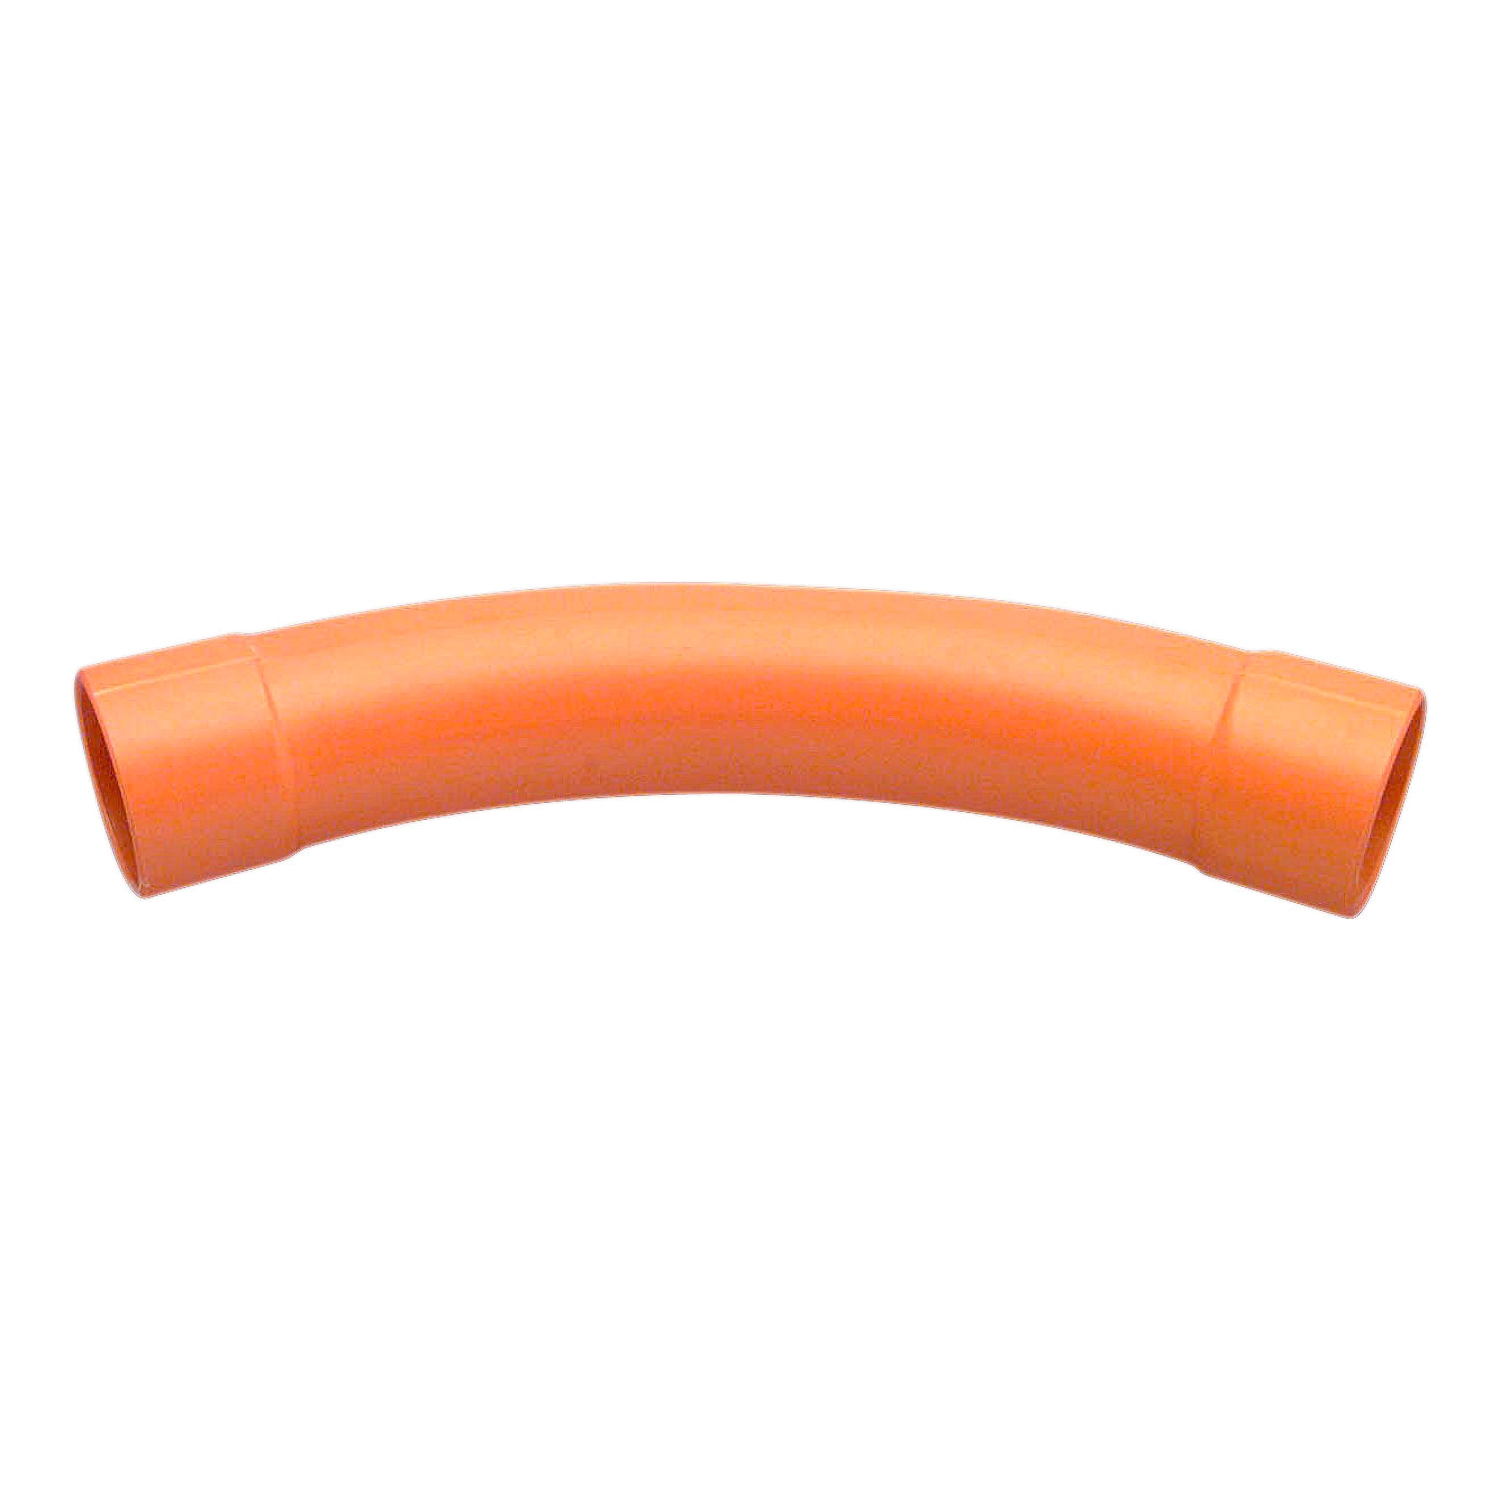 Solid Fittings - PVC, 45 Degree Heavy Duty Sweep Bends, 50mm, Grey